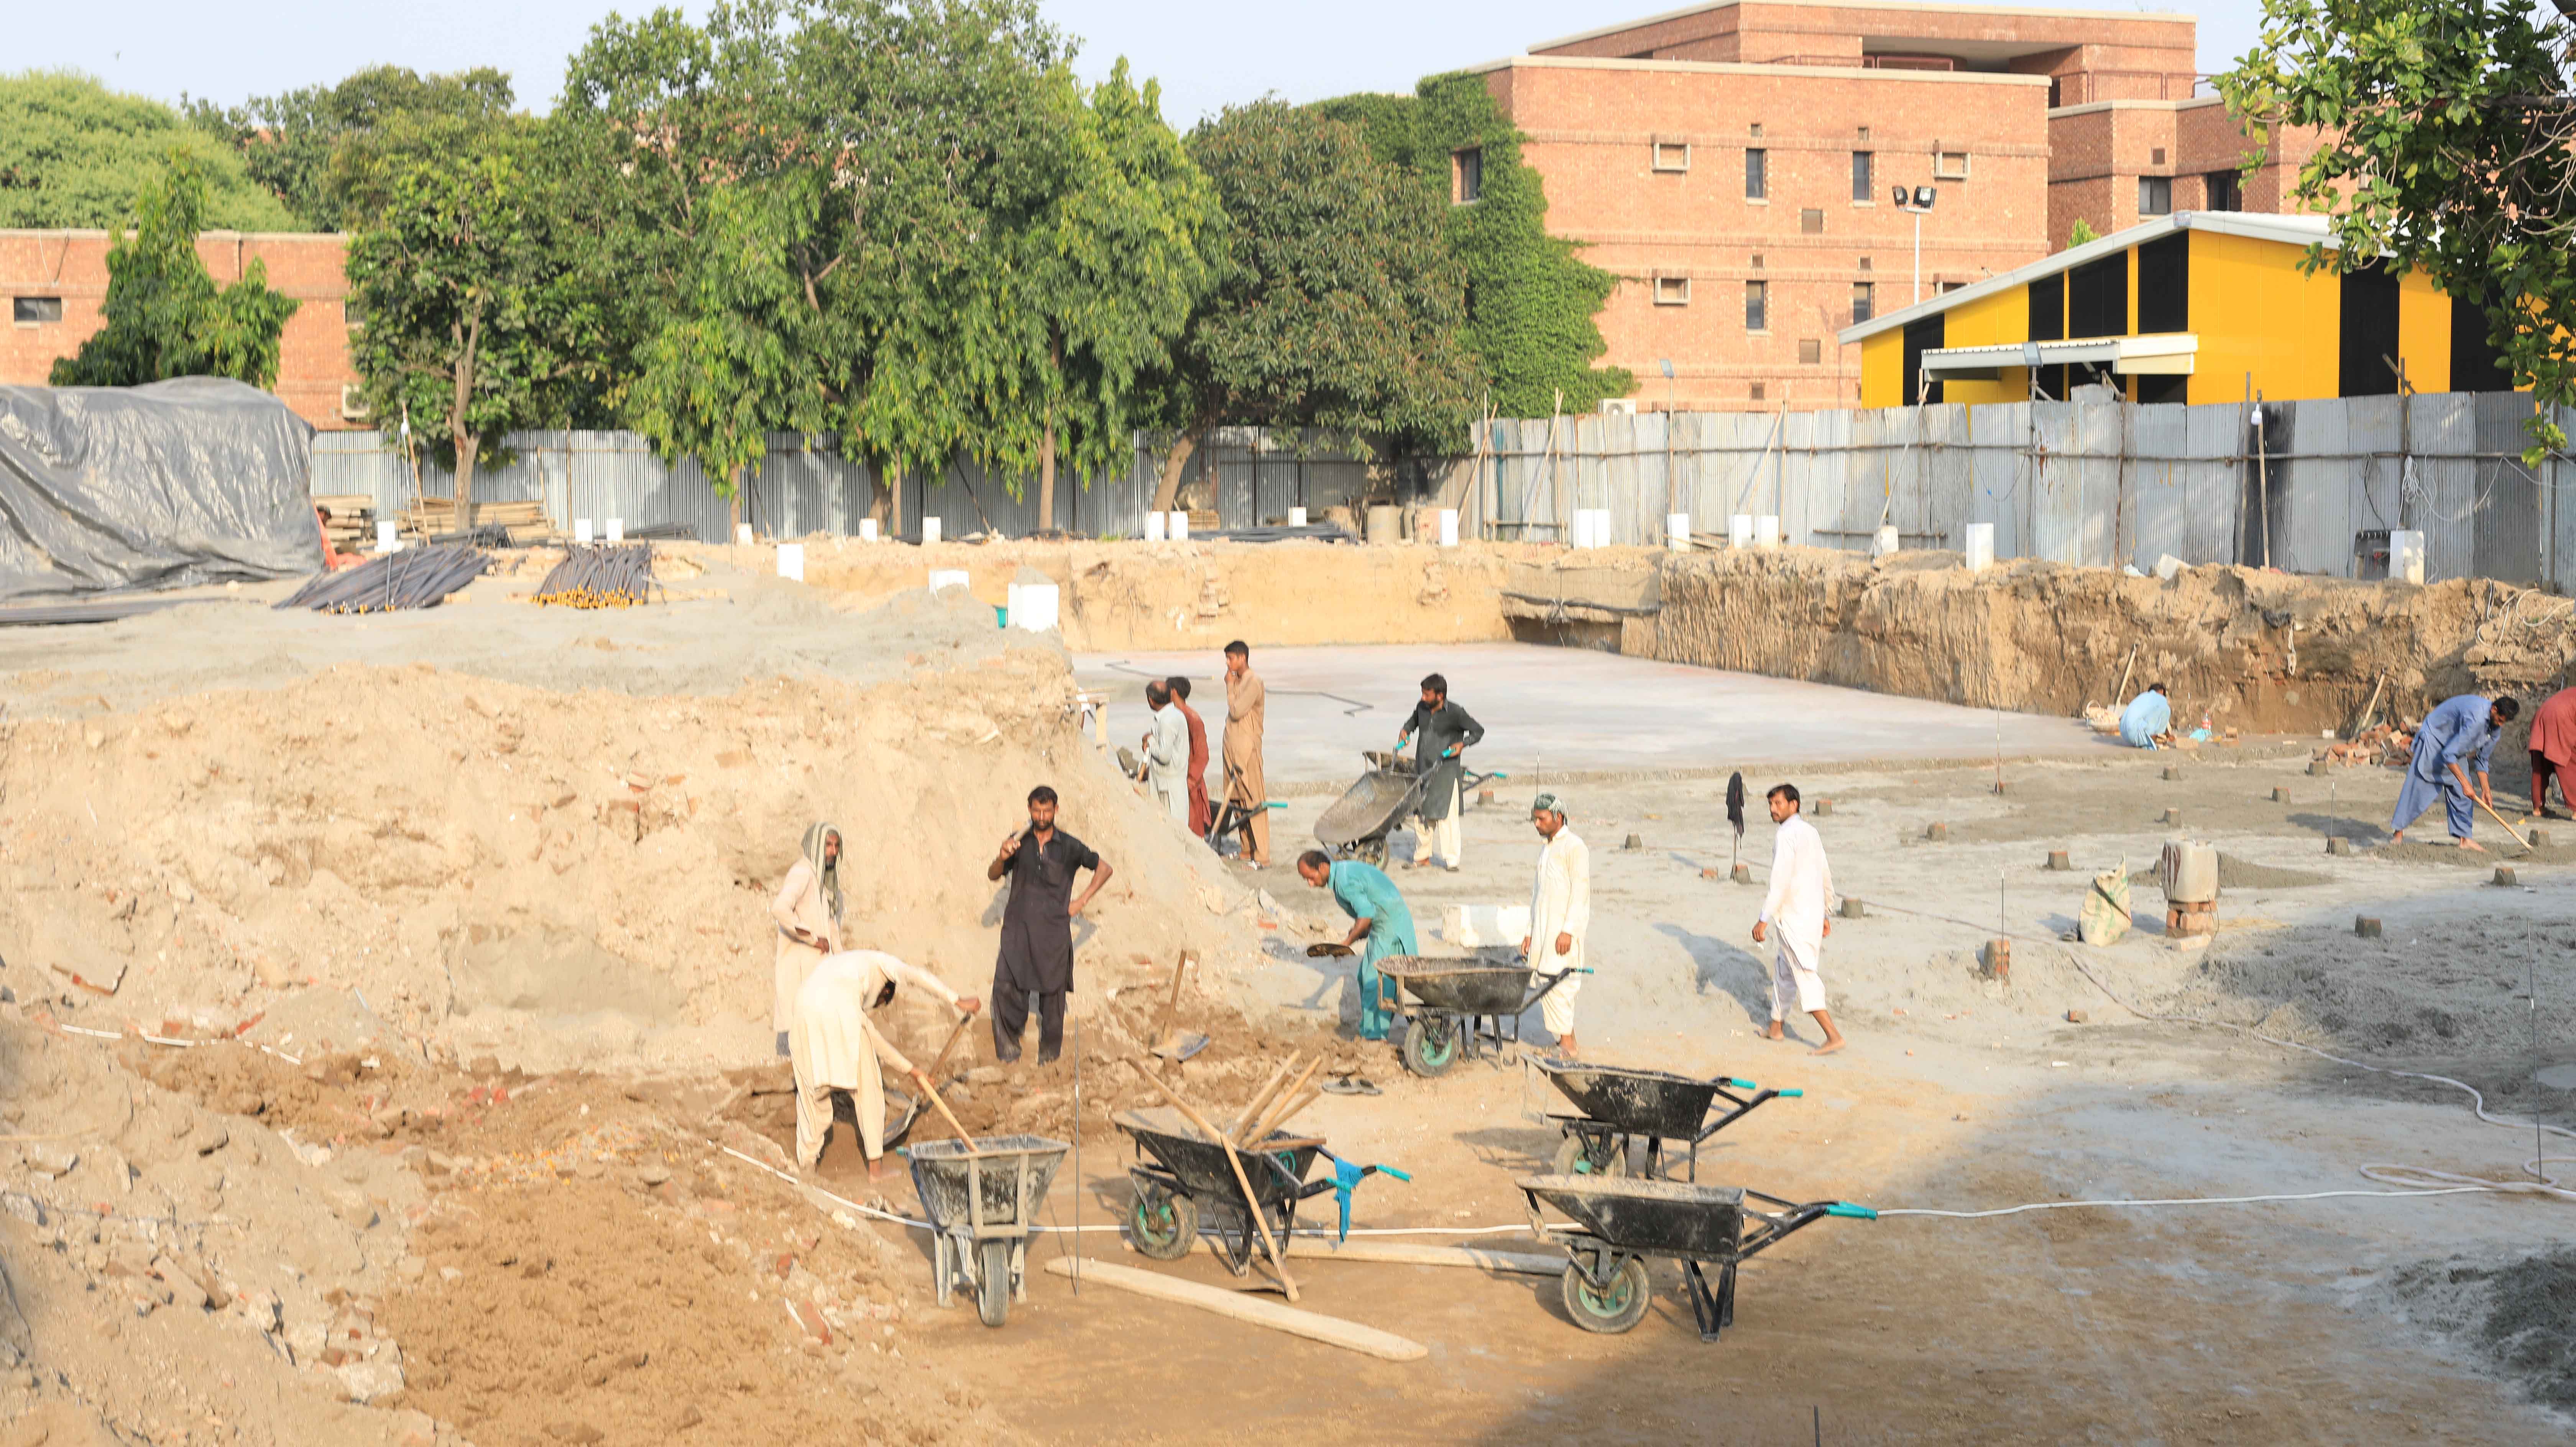 hostel being constructed  